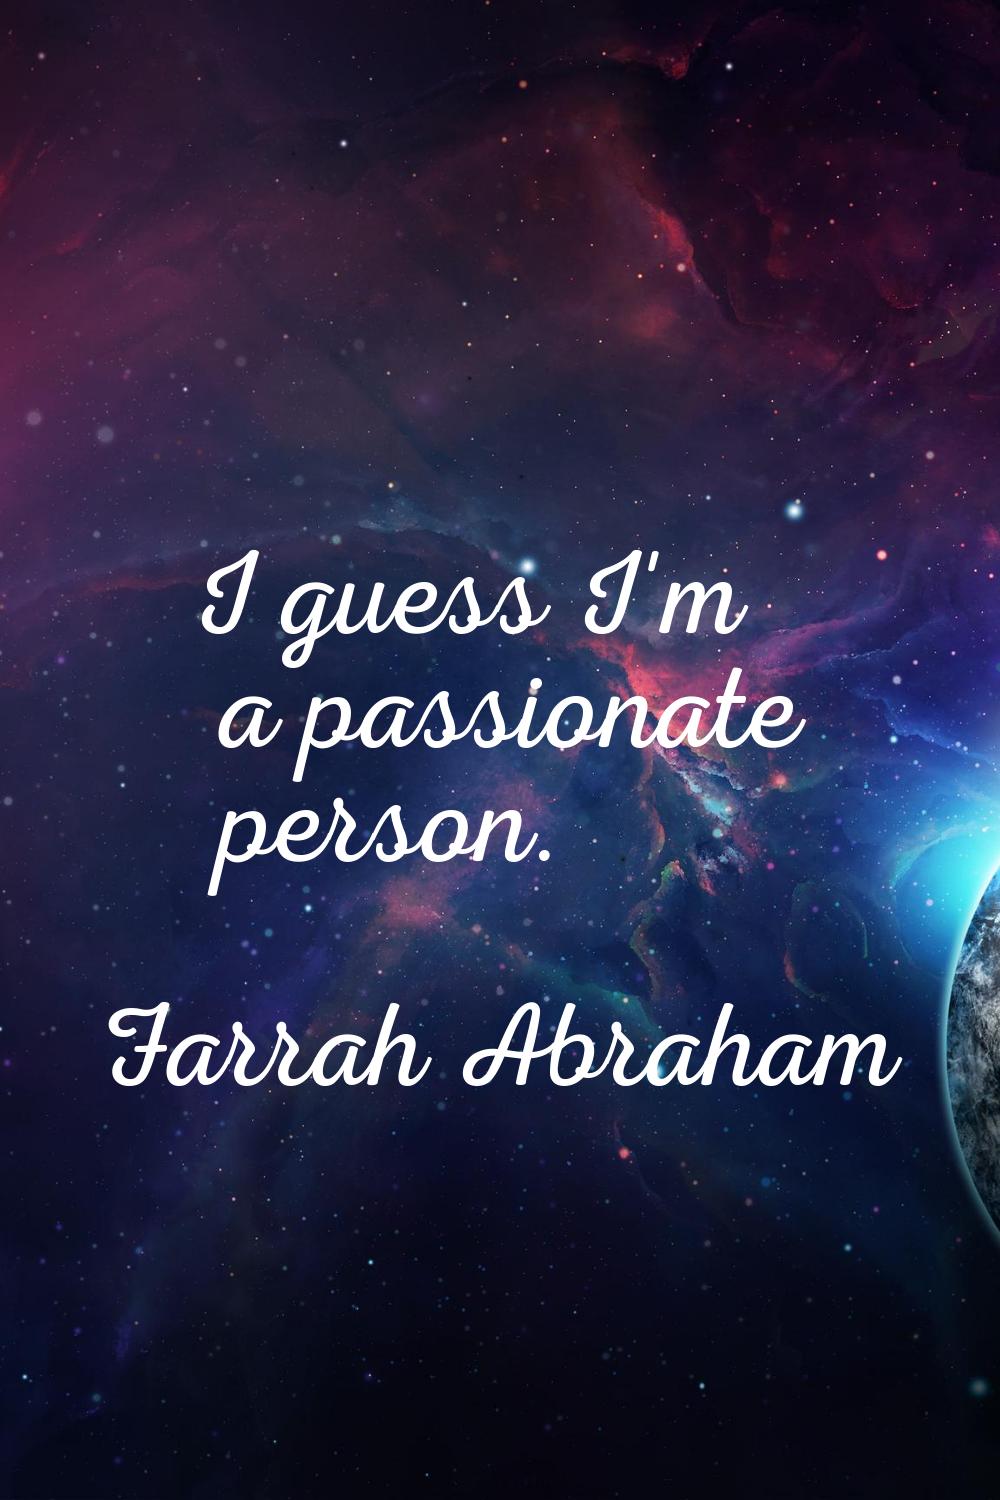 I guess I'm a passionate person.